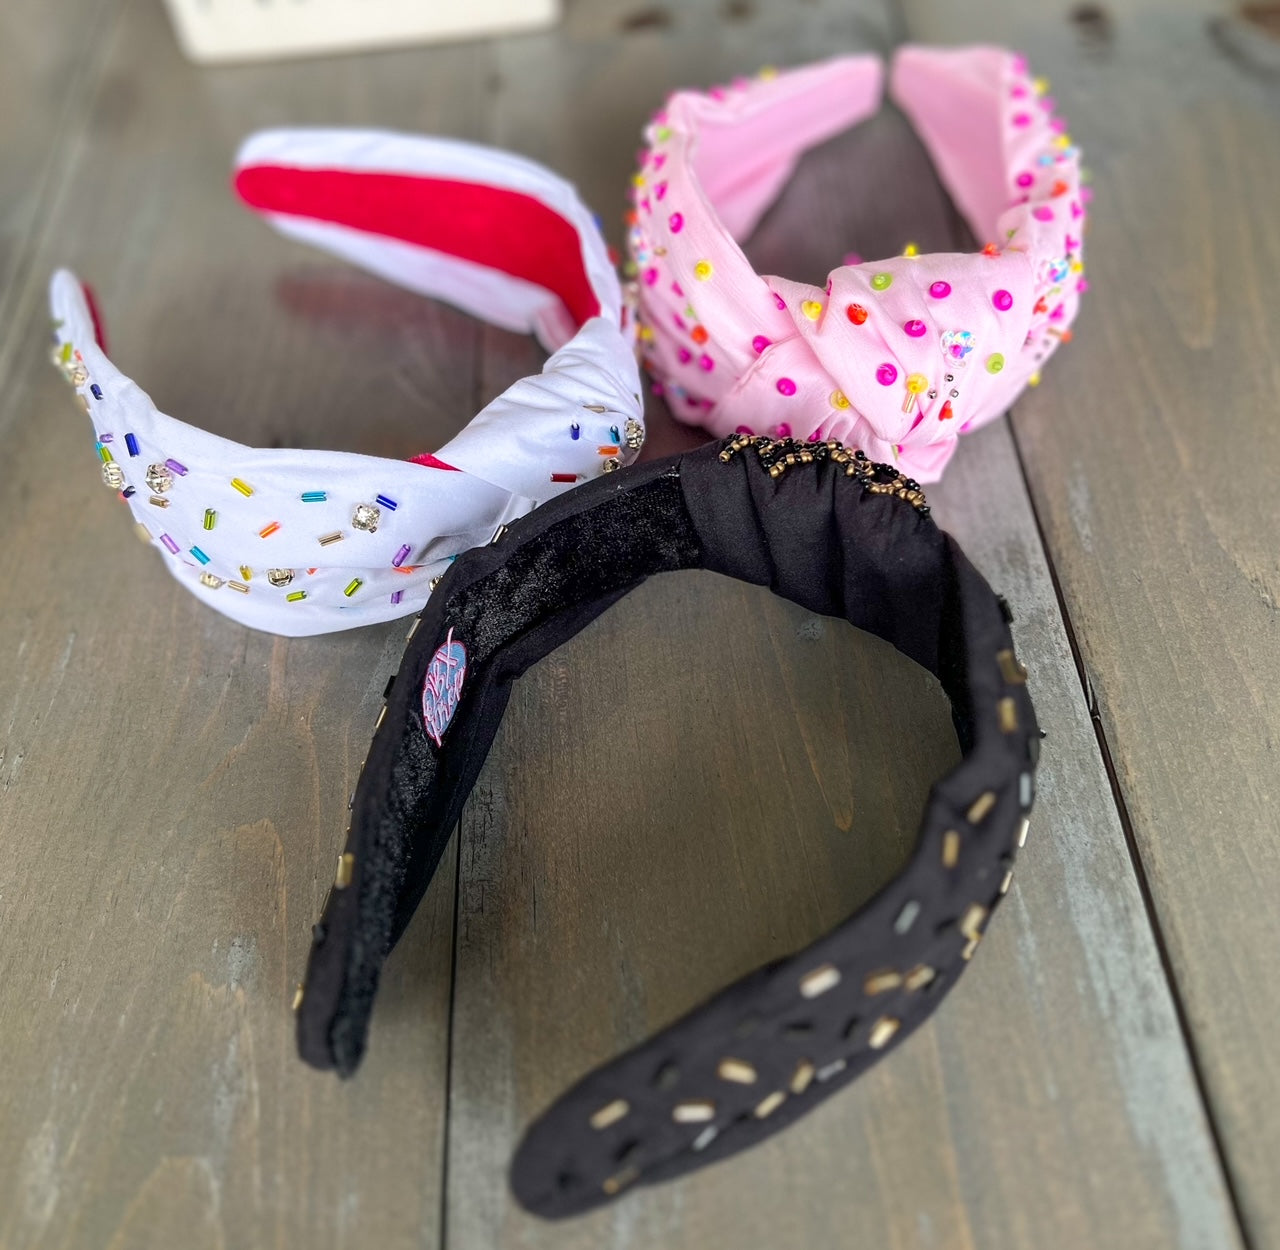 Confetti Beaded Top Knot Headband in Pink, Black and Gold, and White Multi-Colors WS